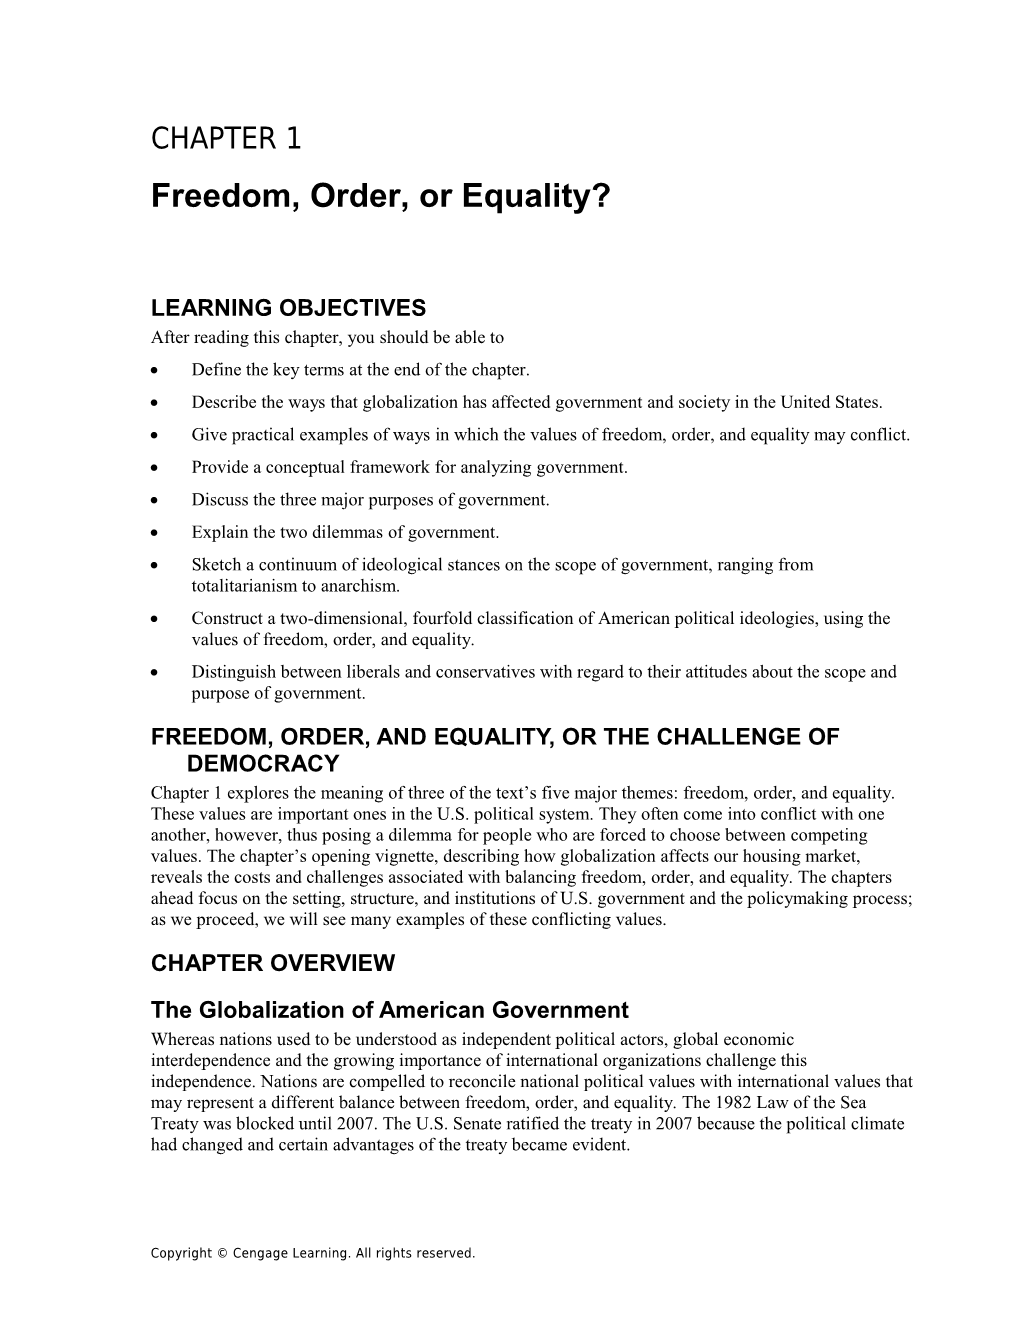 Chapter 1: Freedom, Order, Or Equality? 11